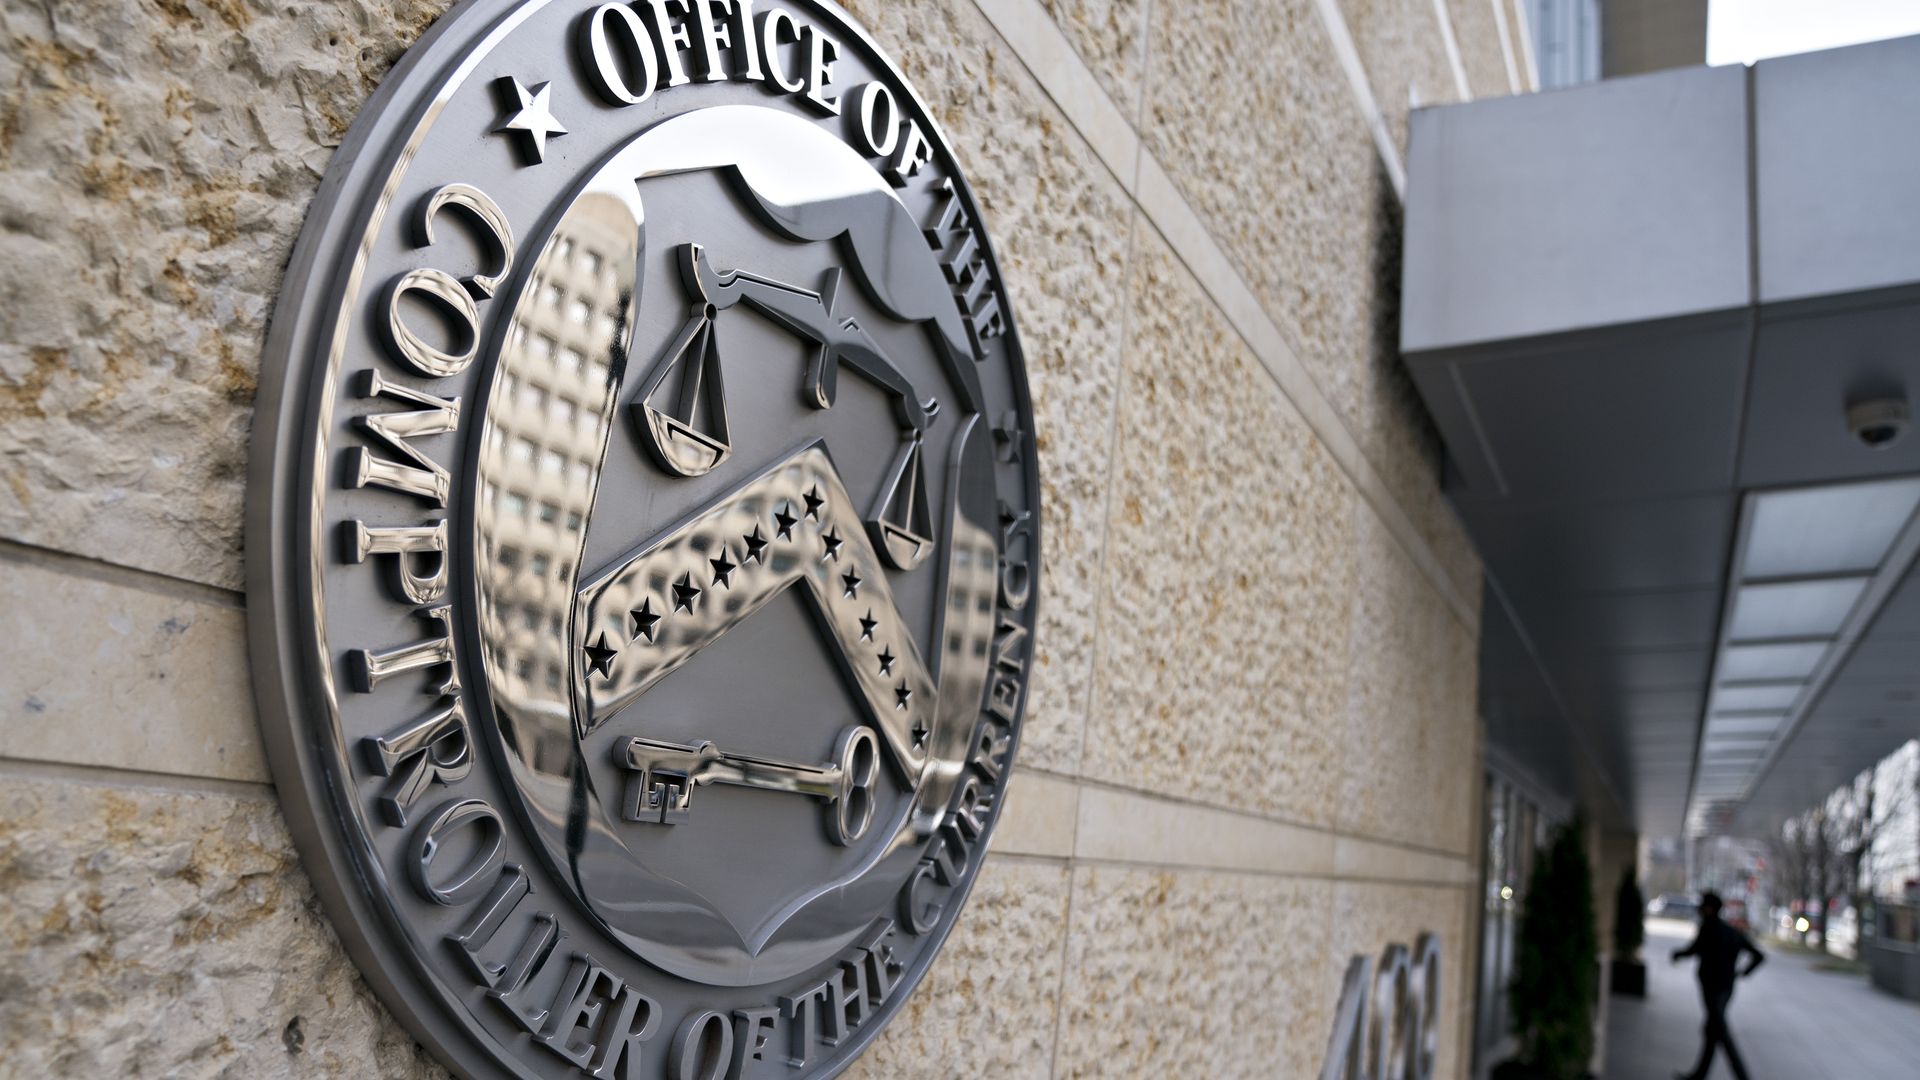 The seal of the Office of the Comptroller of the Currency (OCC) is displayed outside the organization's headquarters in Washington, D.C., U.S., on Wednesday, March 20, 2019. 